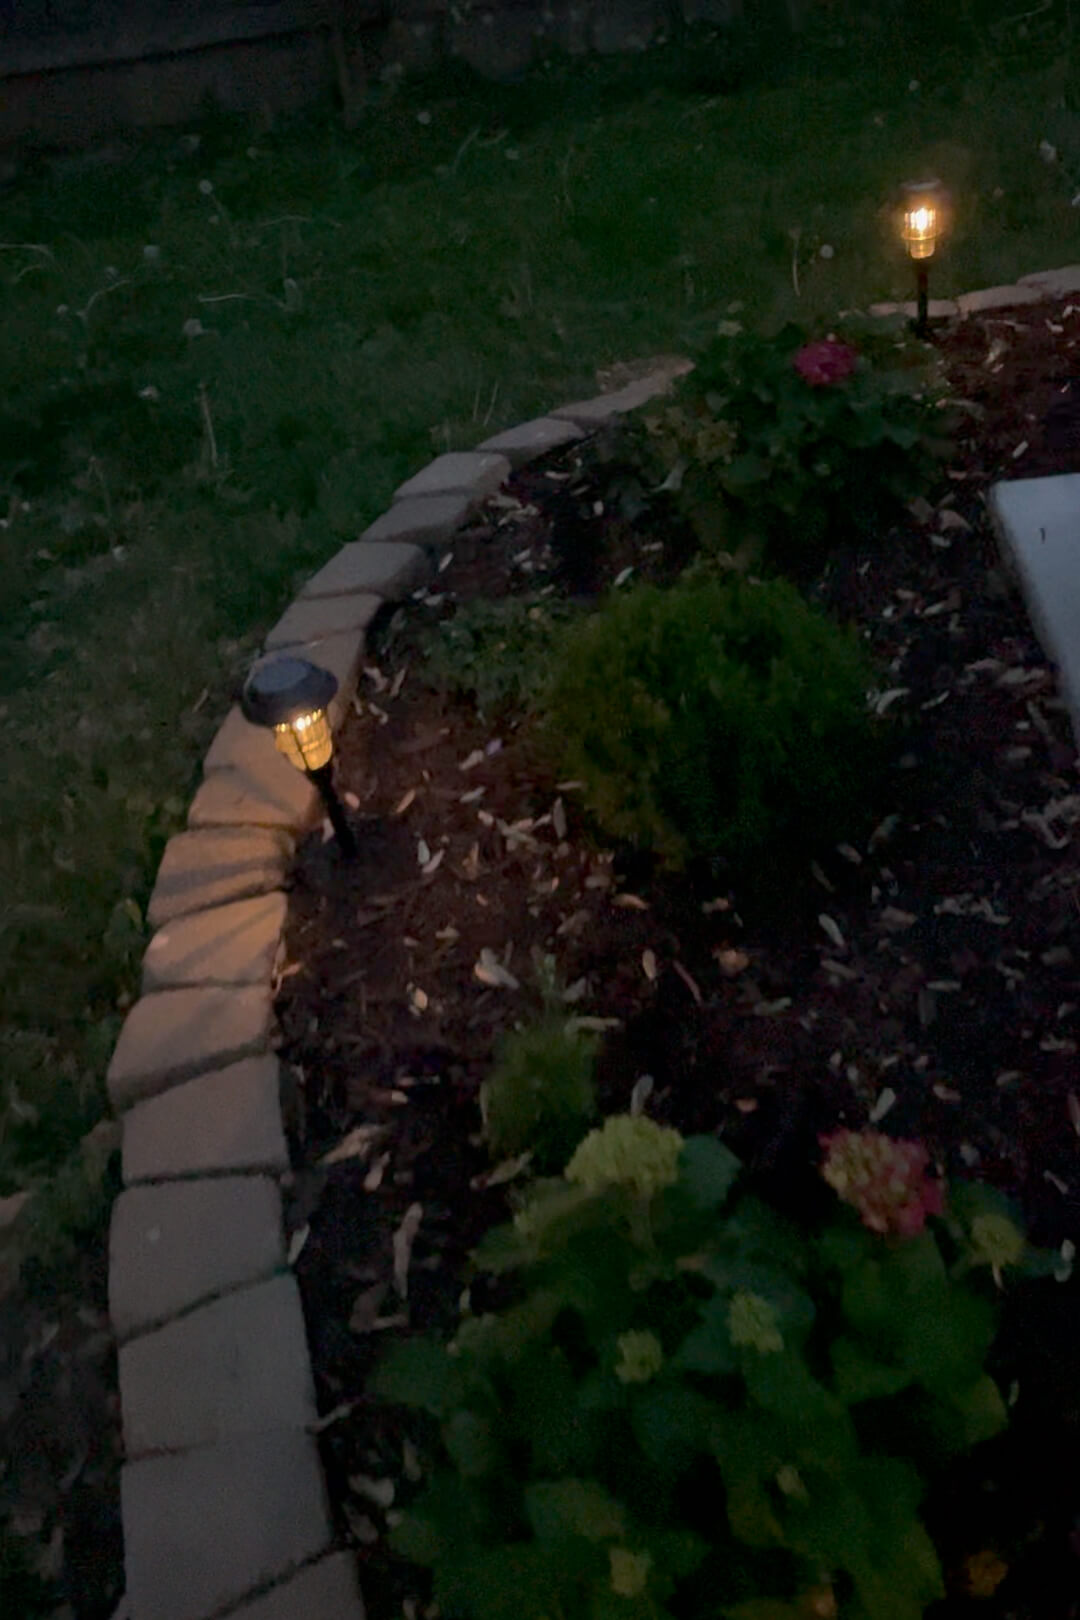 Solar lights in a flower bed at night.